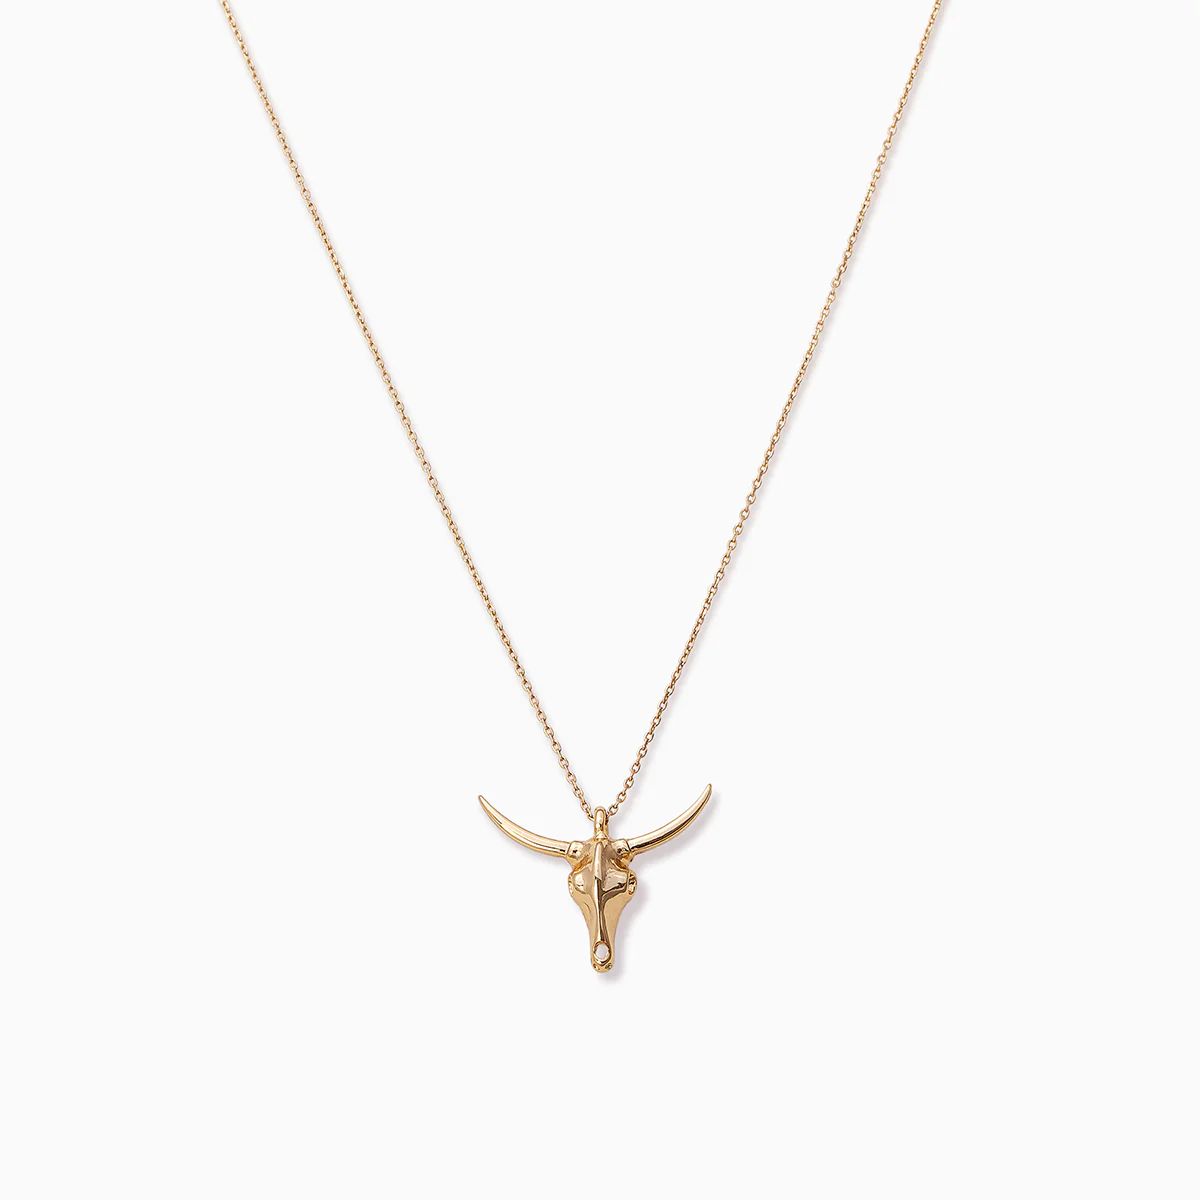 Fighter Longhorn Pendant Necklace in Gold | Uncommon James | Uncommon James